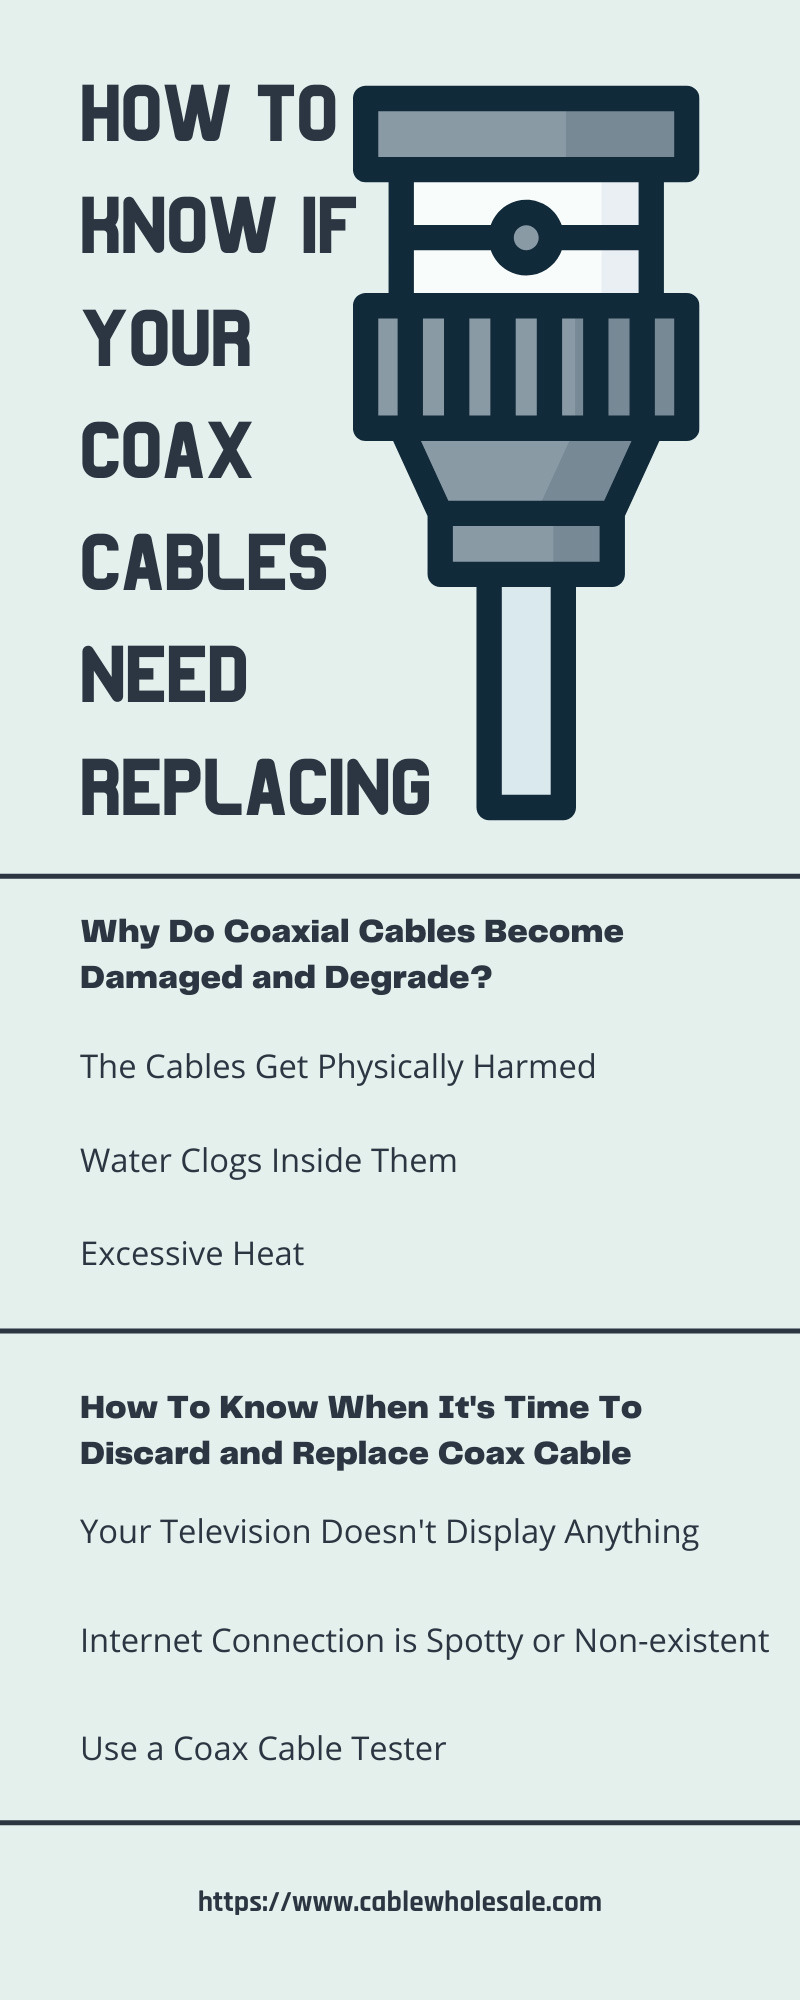 How To Know If Your Coax Cables Need Replacing